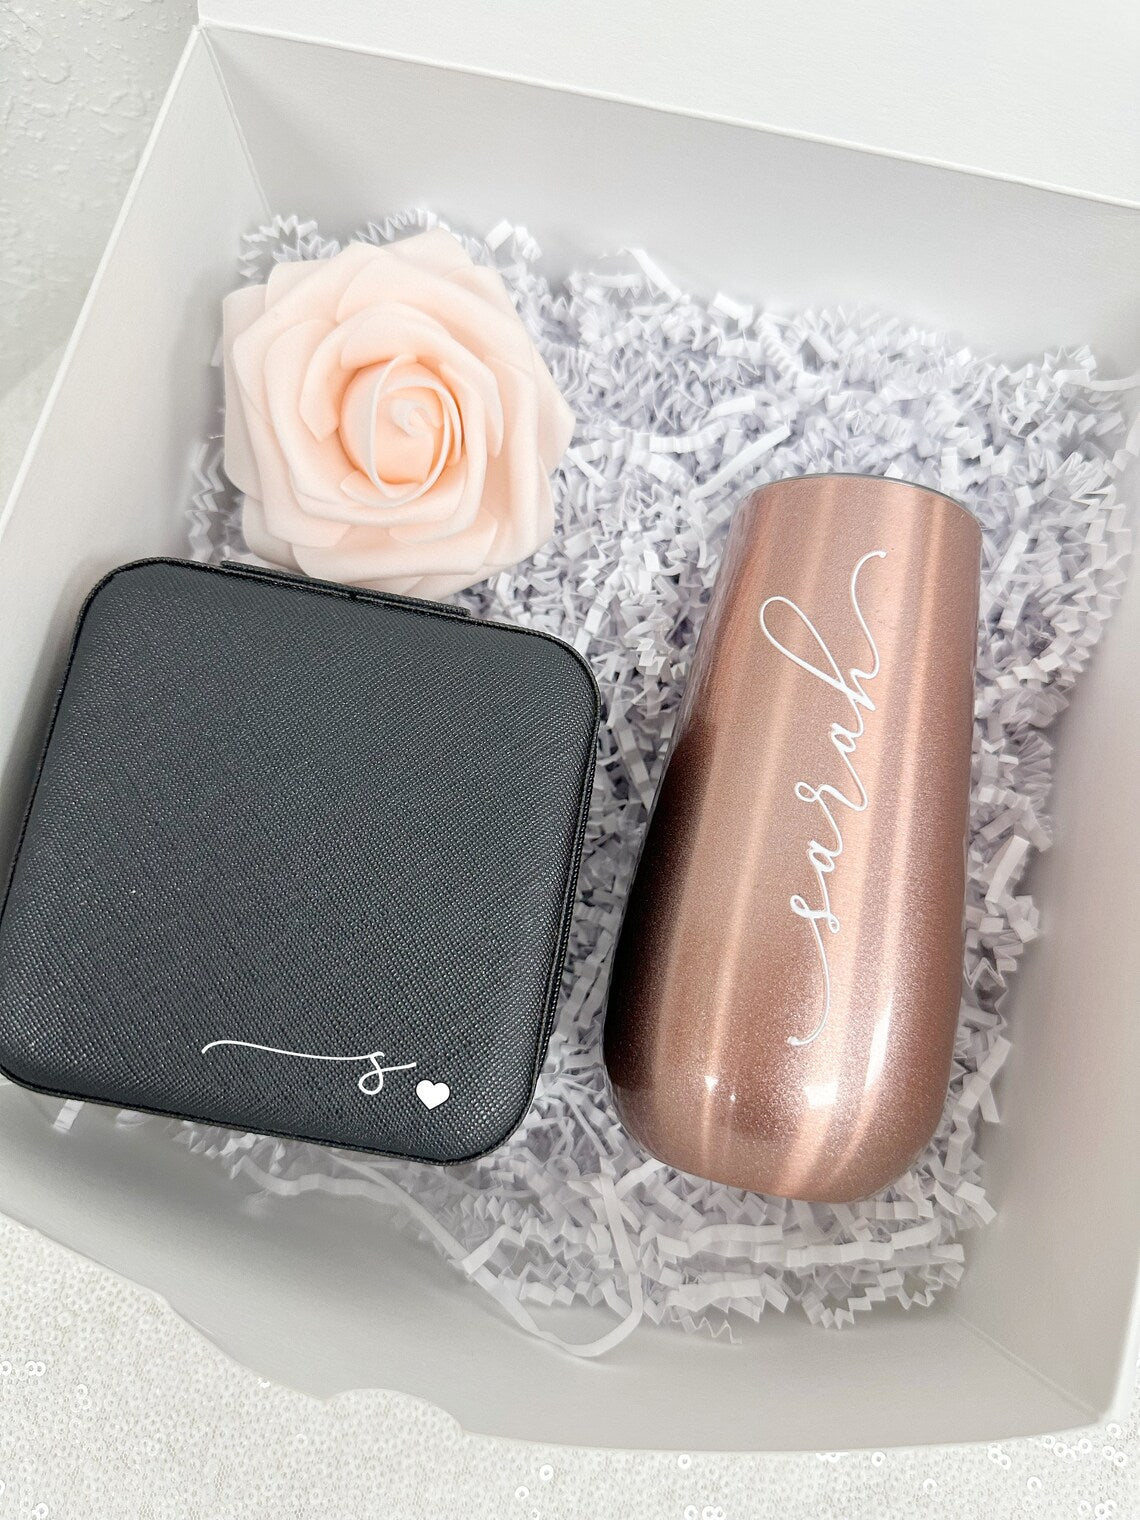 Bridesmaid proposal gift box set- bridesmaid champagne flute tumbler- maid of honor proposal- personalized travel jewelry box case initial